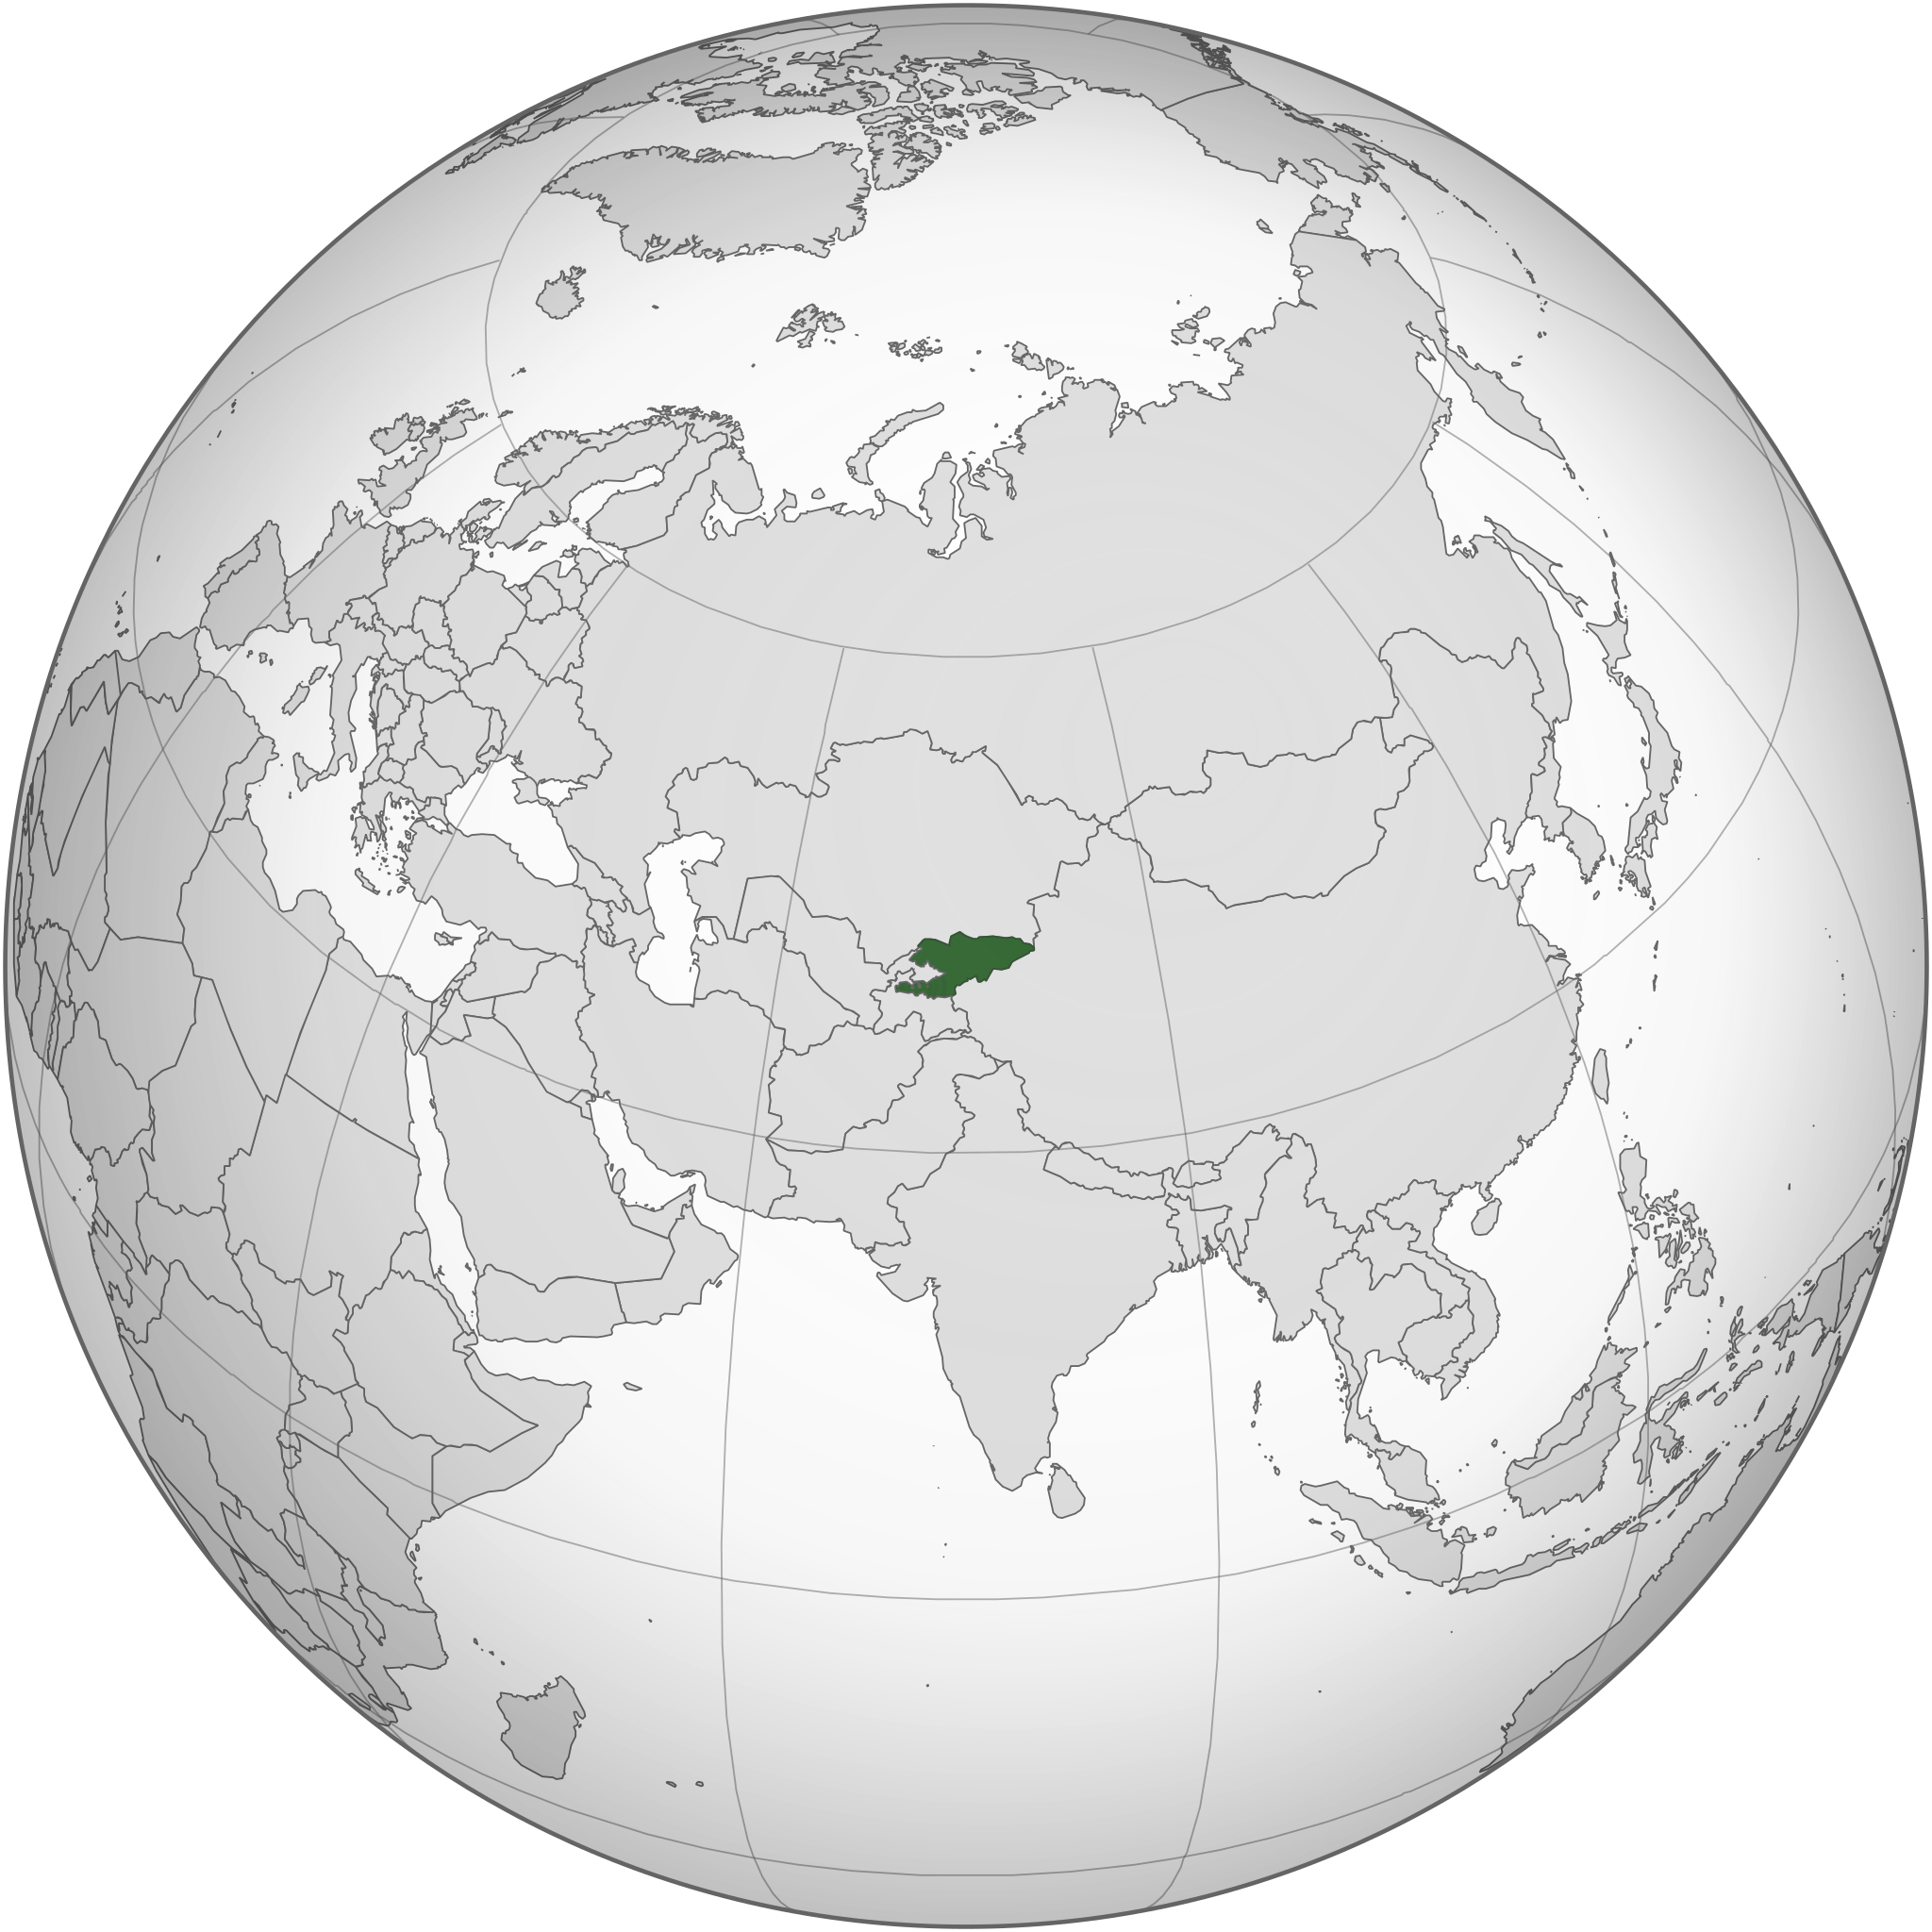 Kyrgyzstan is a small country south of Kazakhstan, east of Uzbekistan, north of Tajikistan, and west of China.